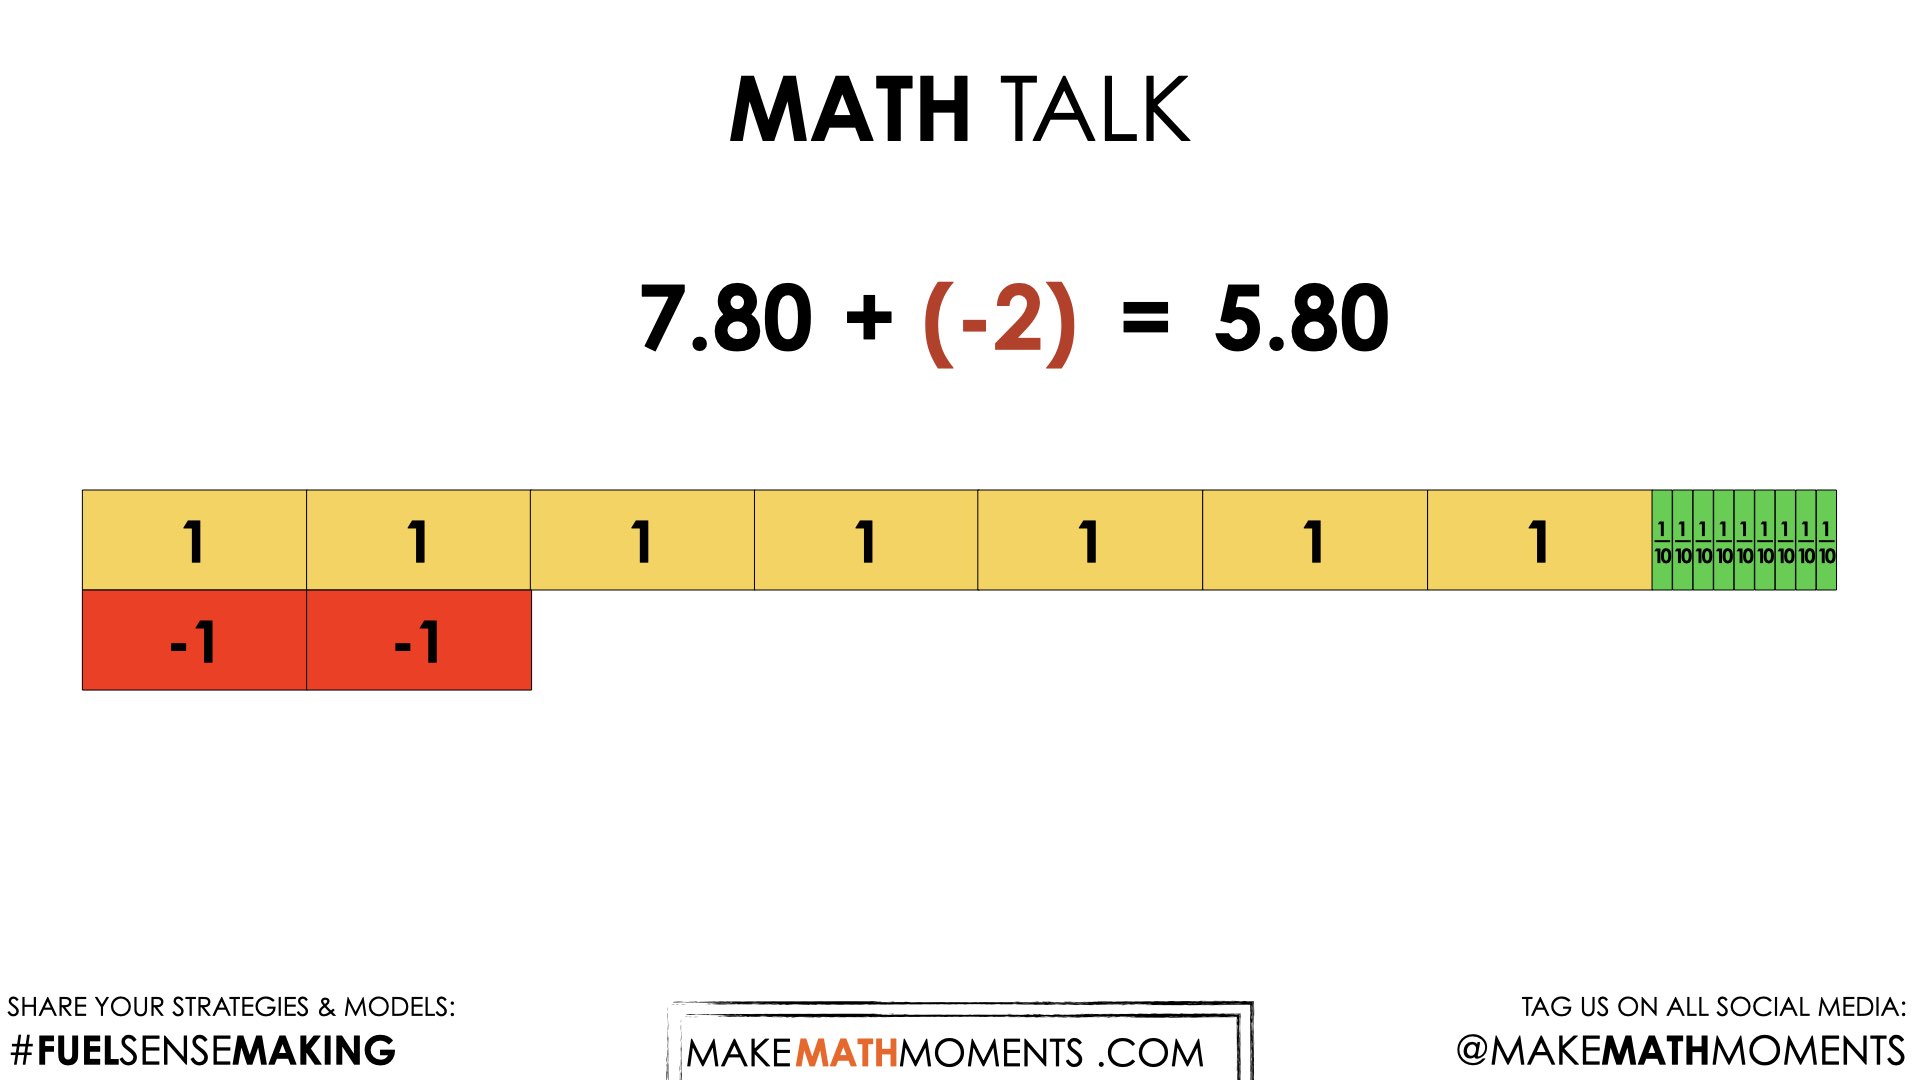 Piggy Bank Revisited [Day 5] - Show Your Growth - 02 - MATH TALK Silent Solution Animation Image 1.001